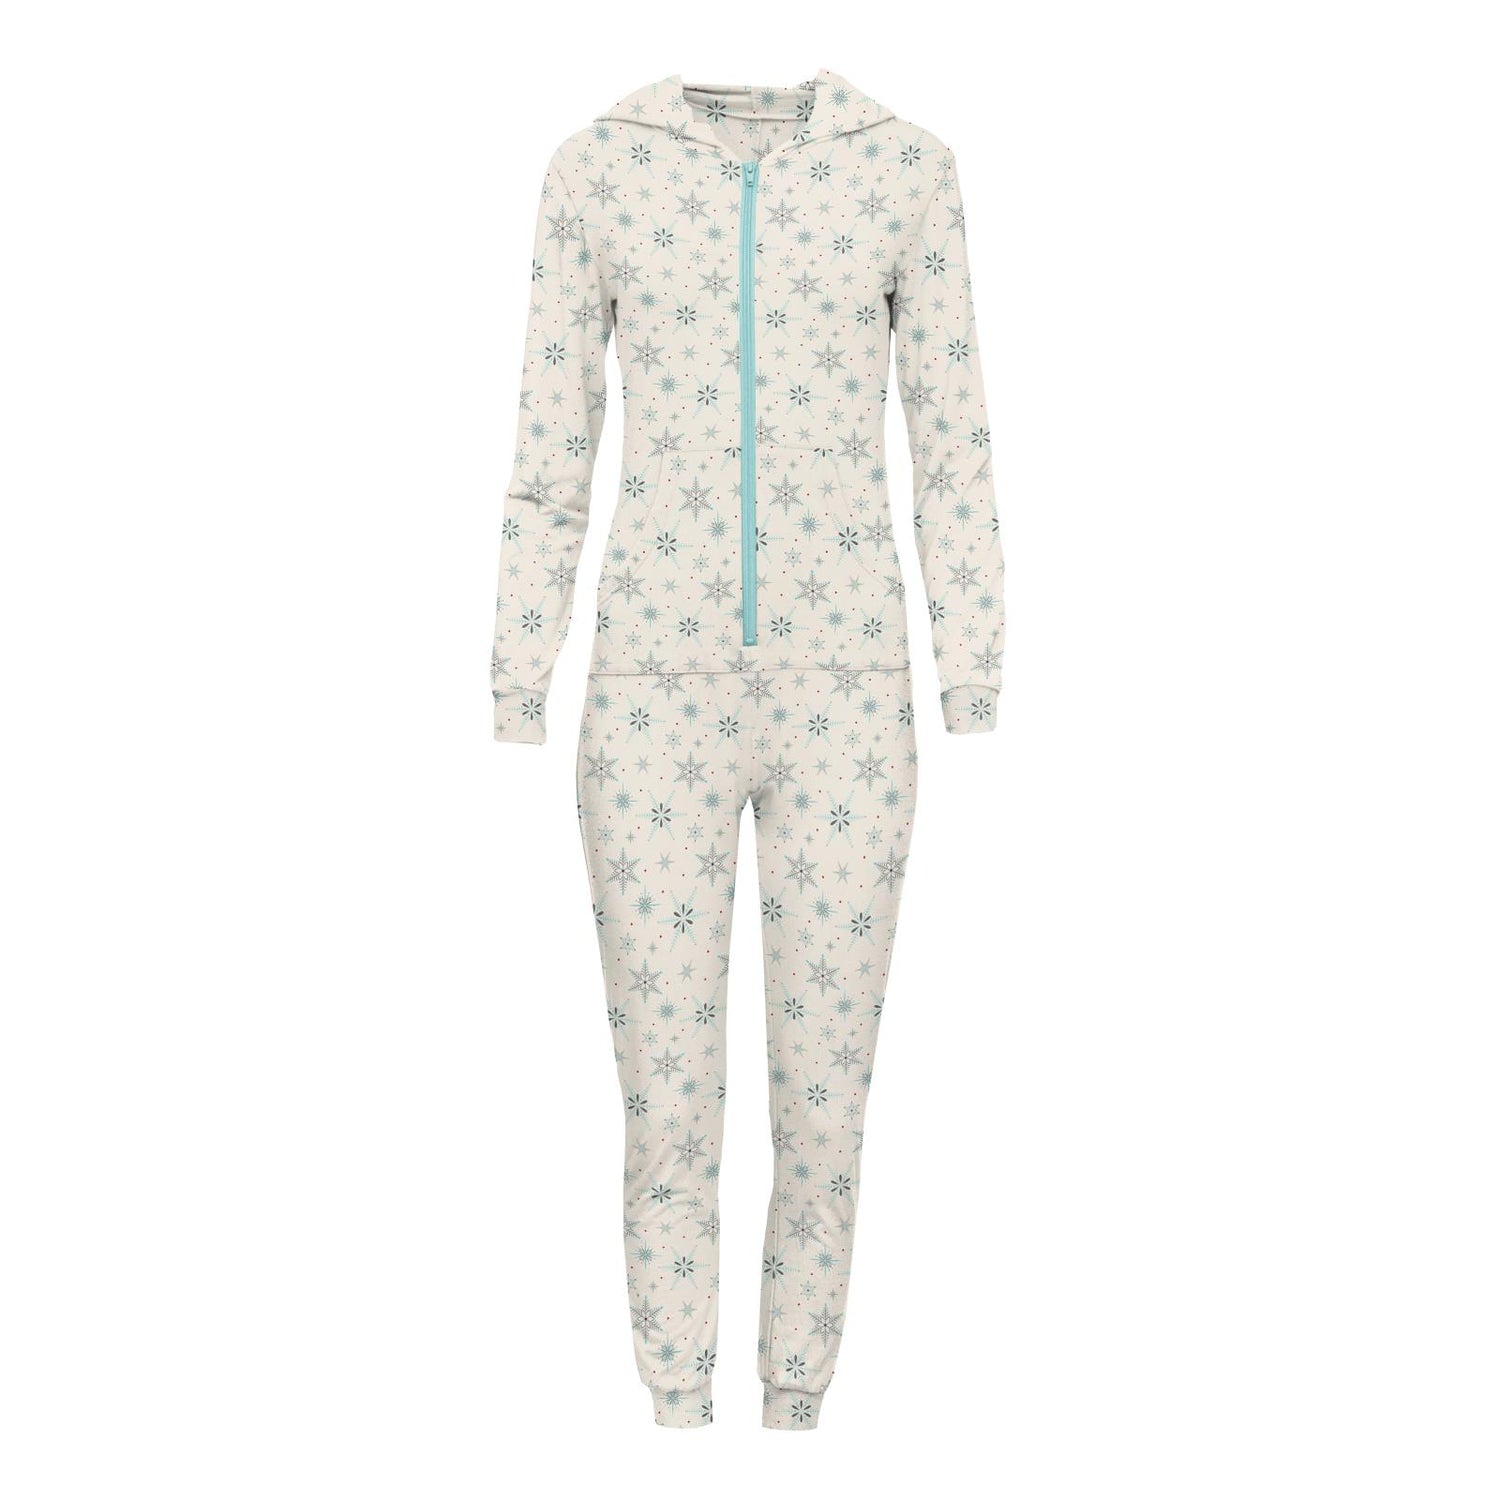 Women's Print Long Sleeve Jumpsuit with Hood in Natural Snowflakes